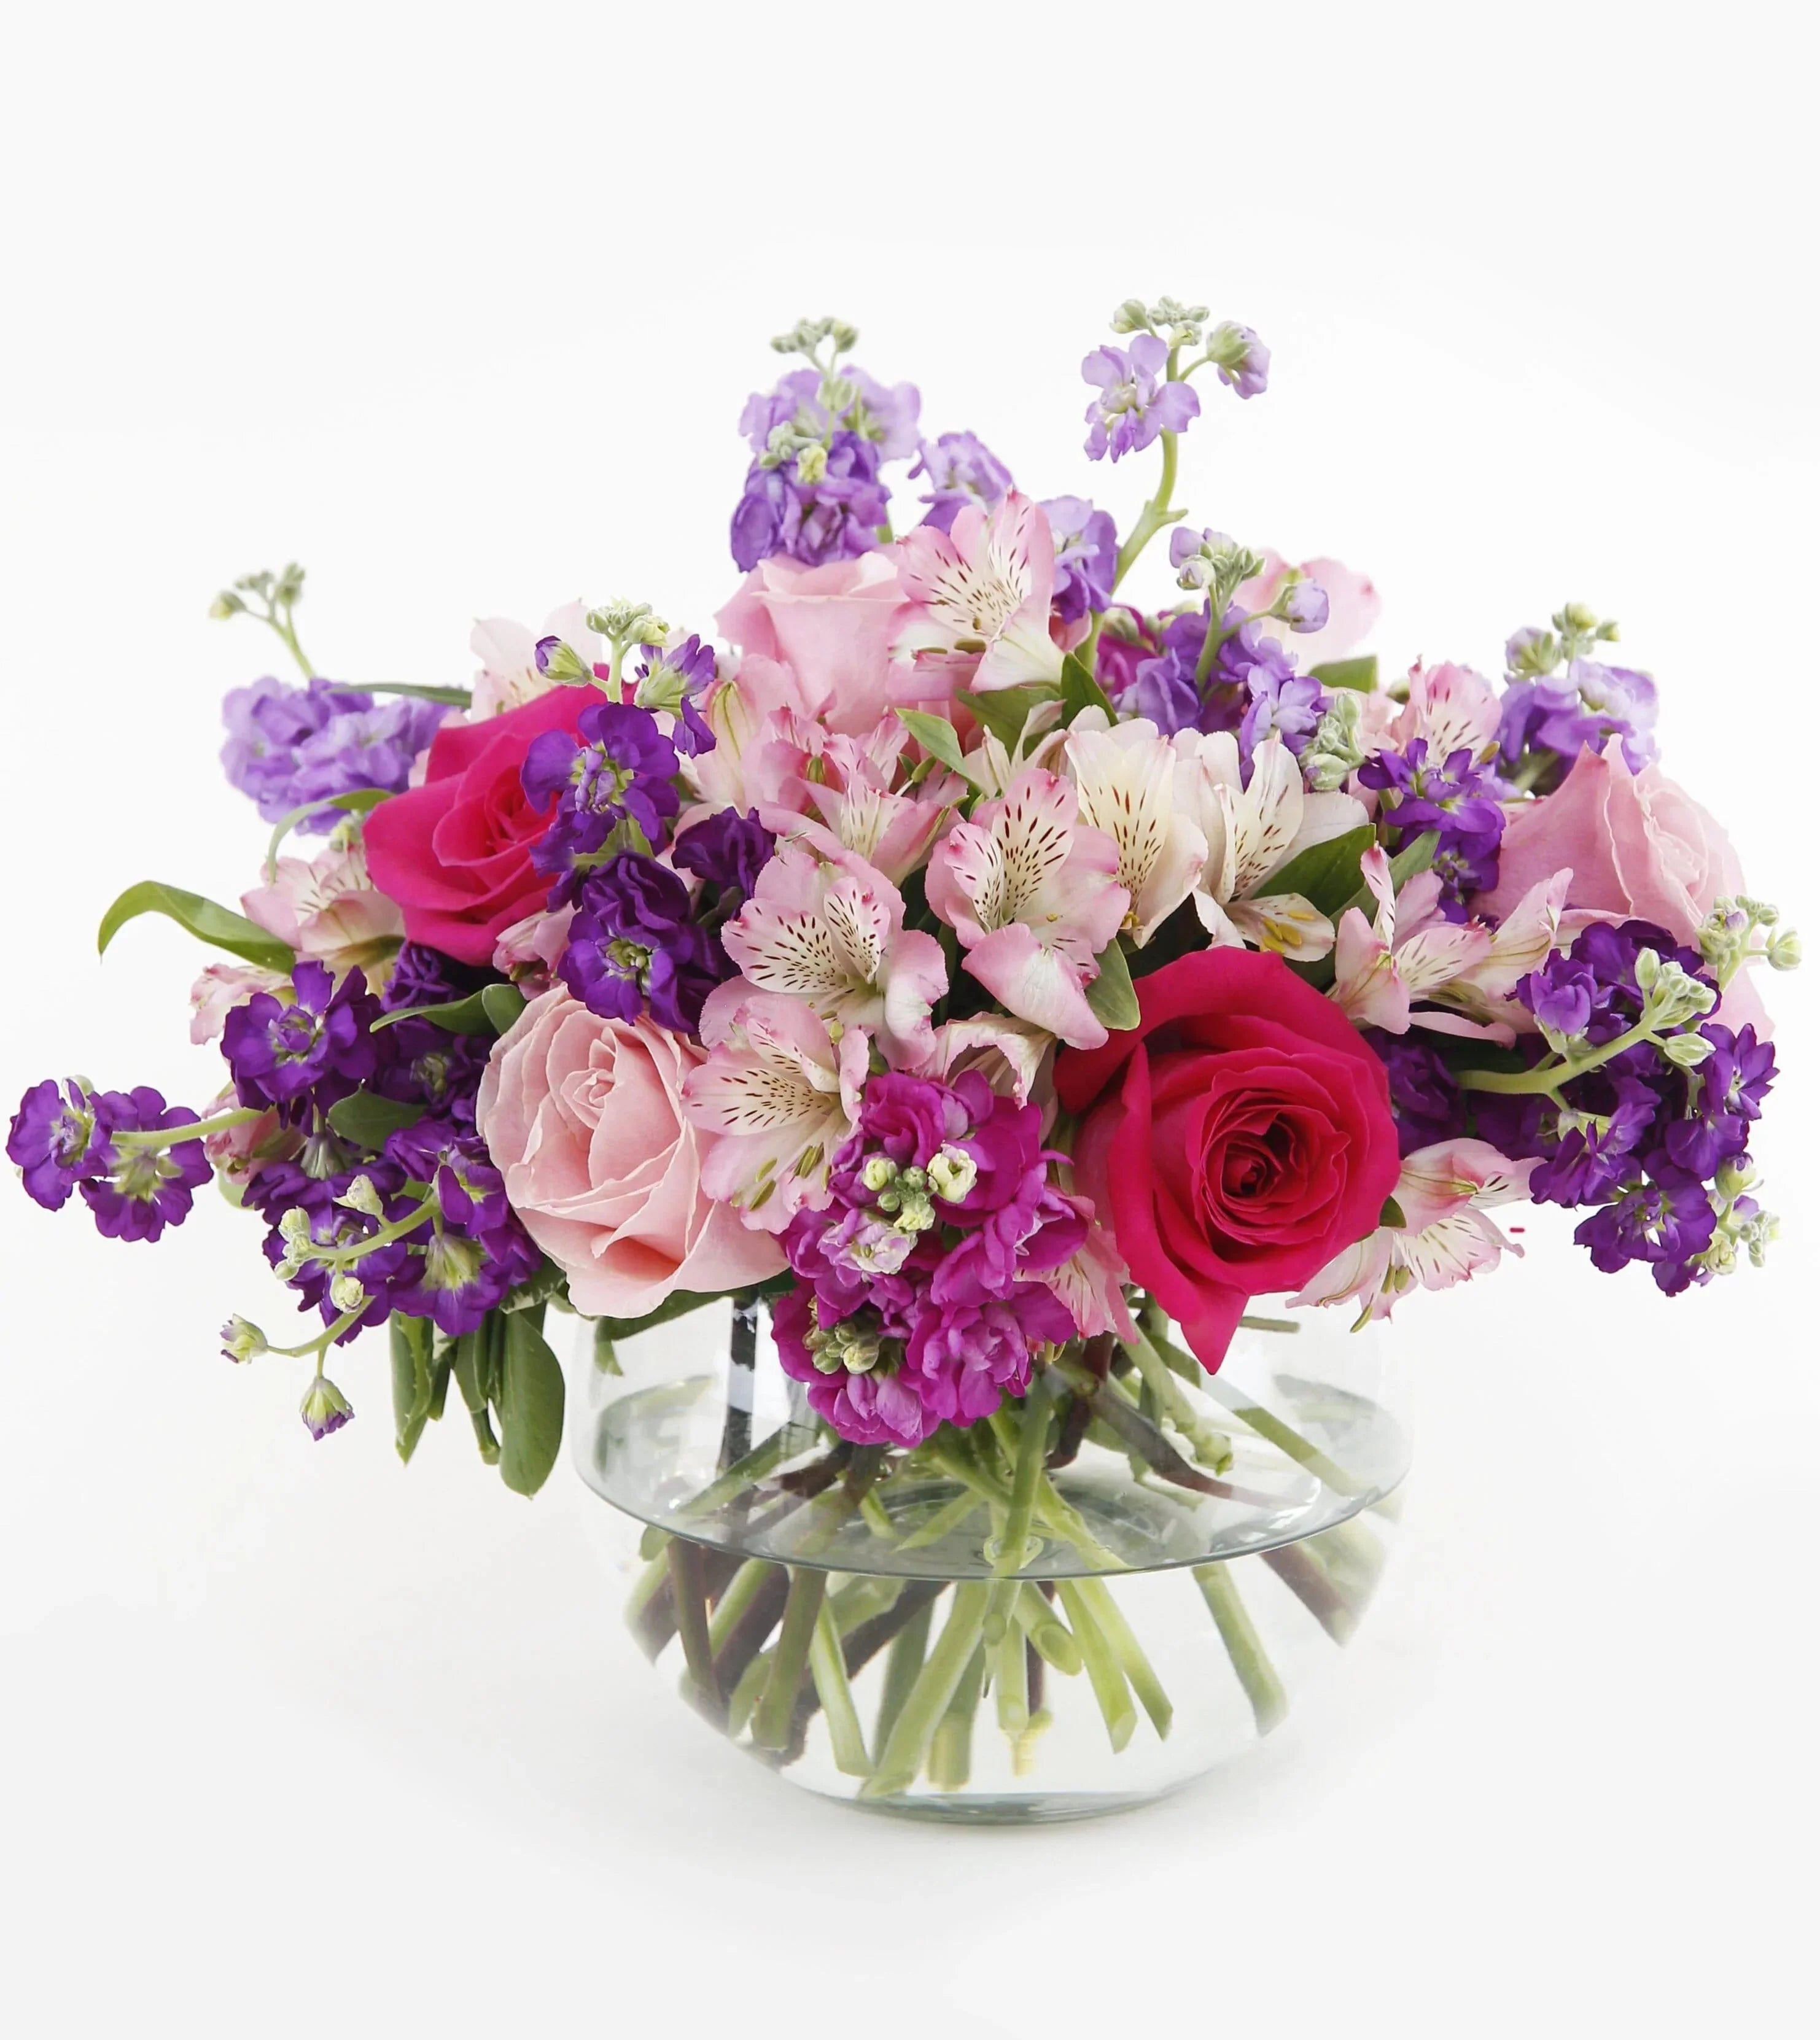 Tranquil Bouquet Fuller - hot pink roses , pink roses , purple stock , lavender stock , fuchsia stock , pink lilies , vase arrangement